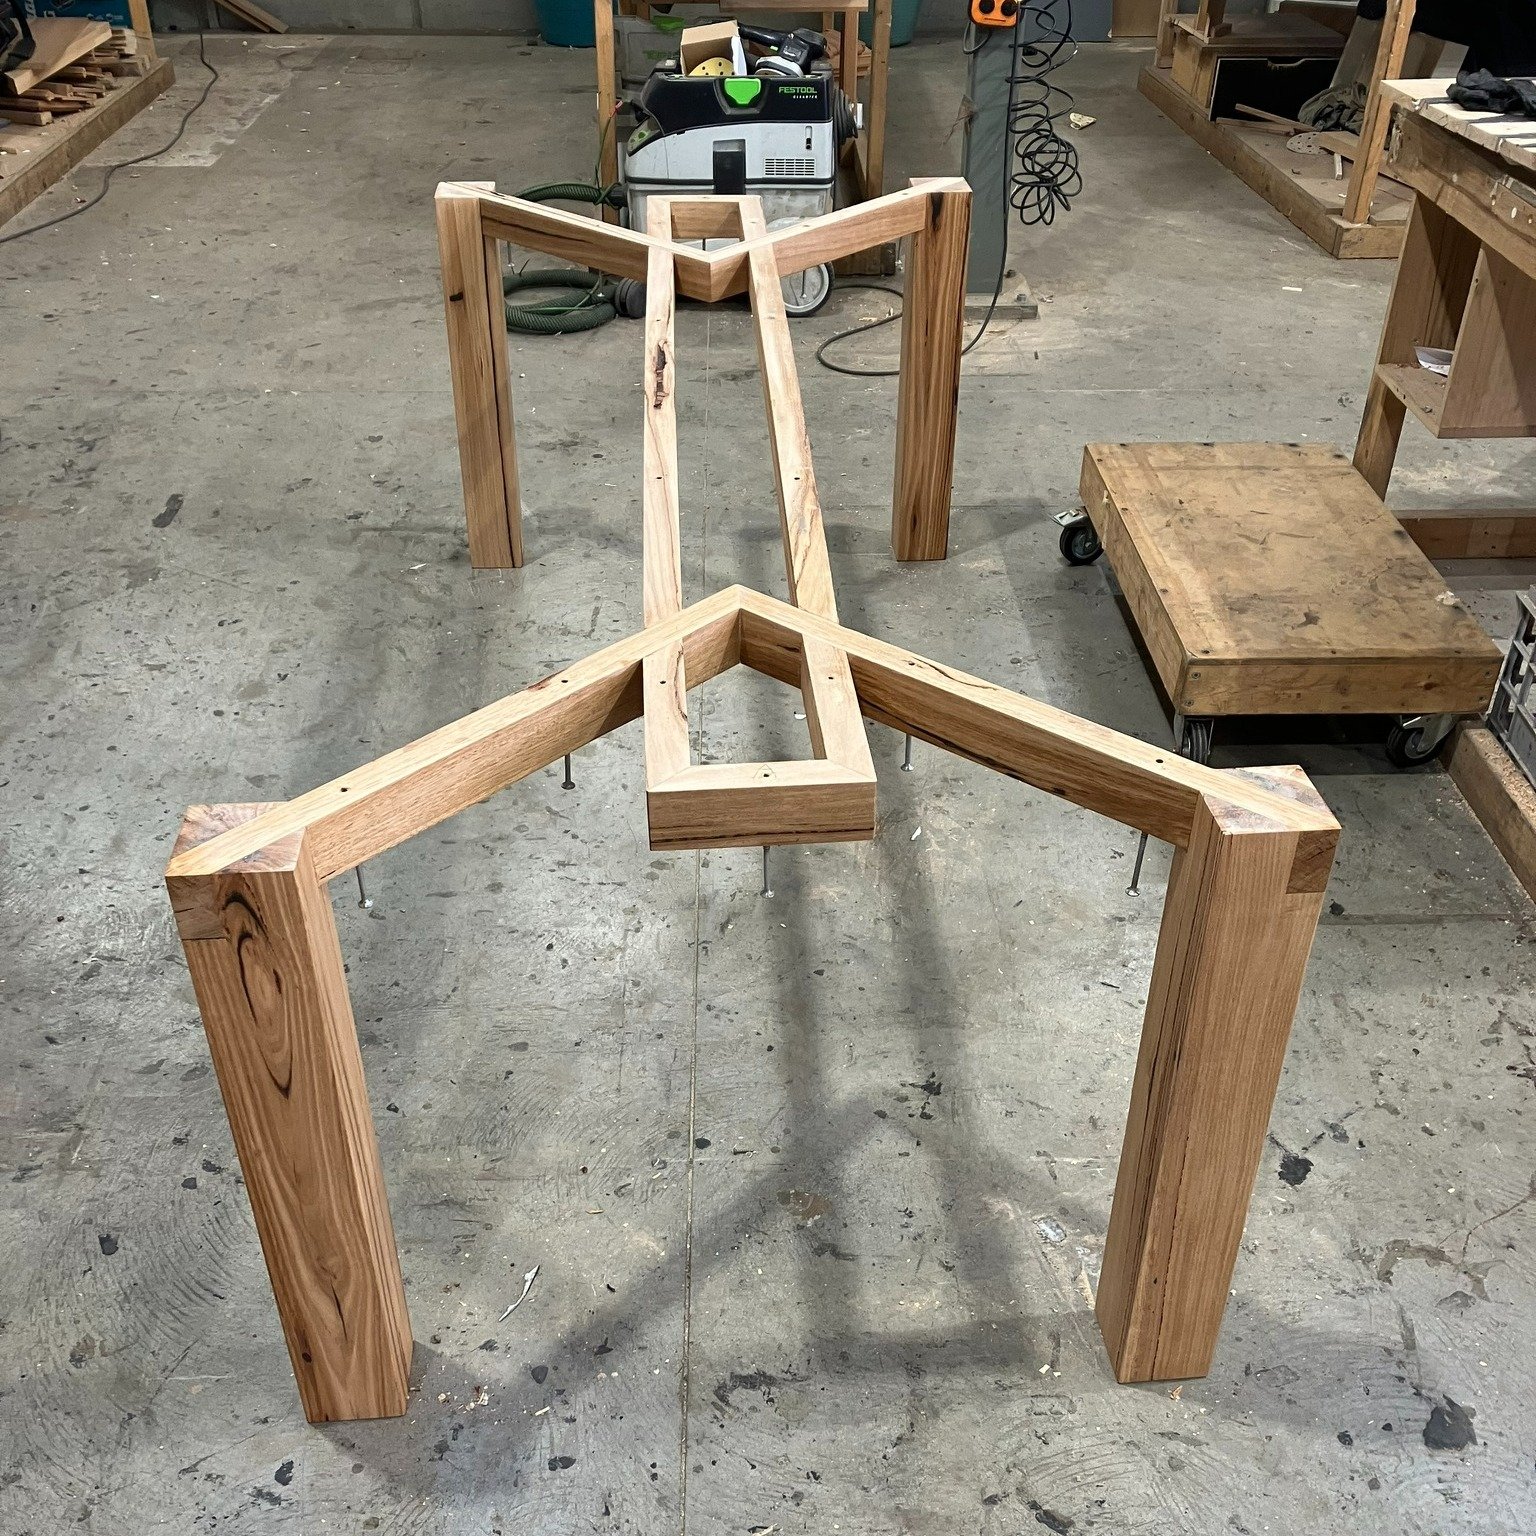 The leg design of our Fairhaven dining table is a thing of beauty!!

#fairhavendiningtable #furnituremaker #diningtable